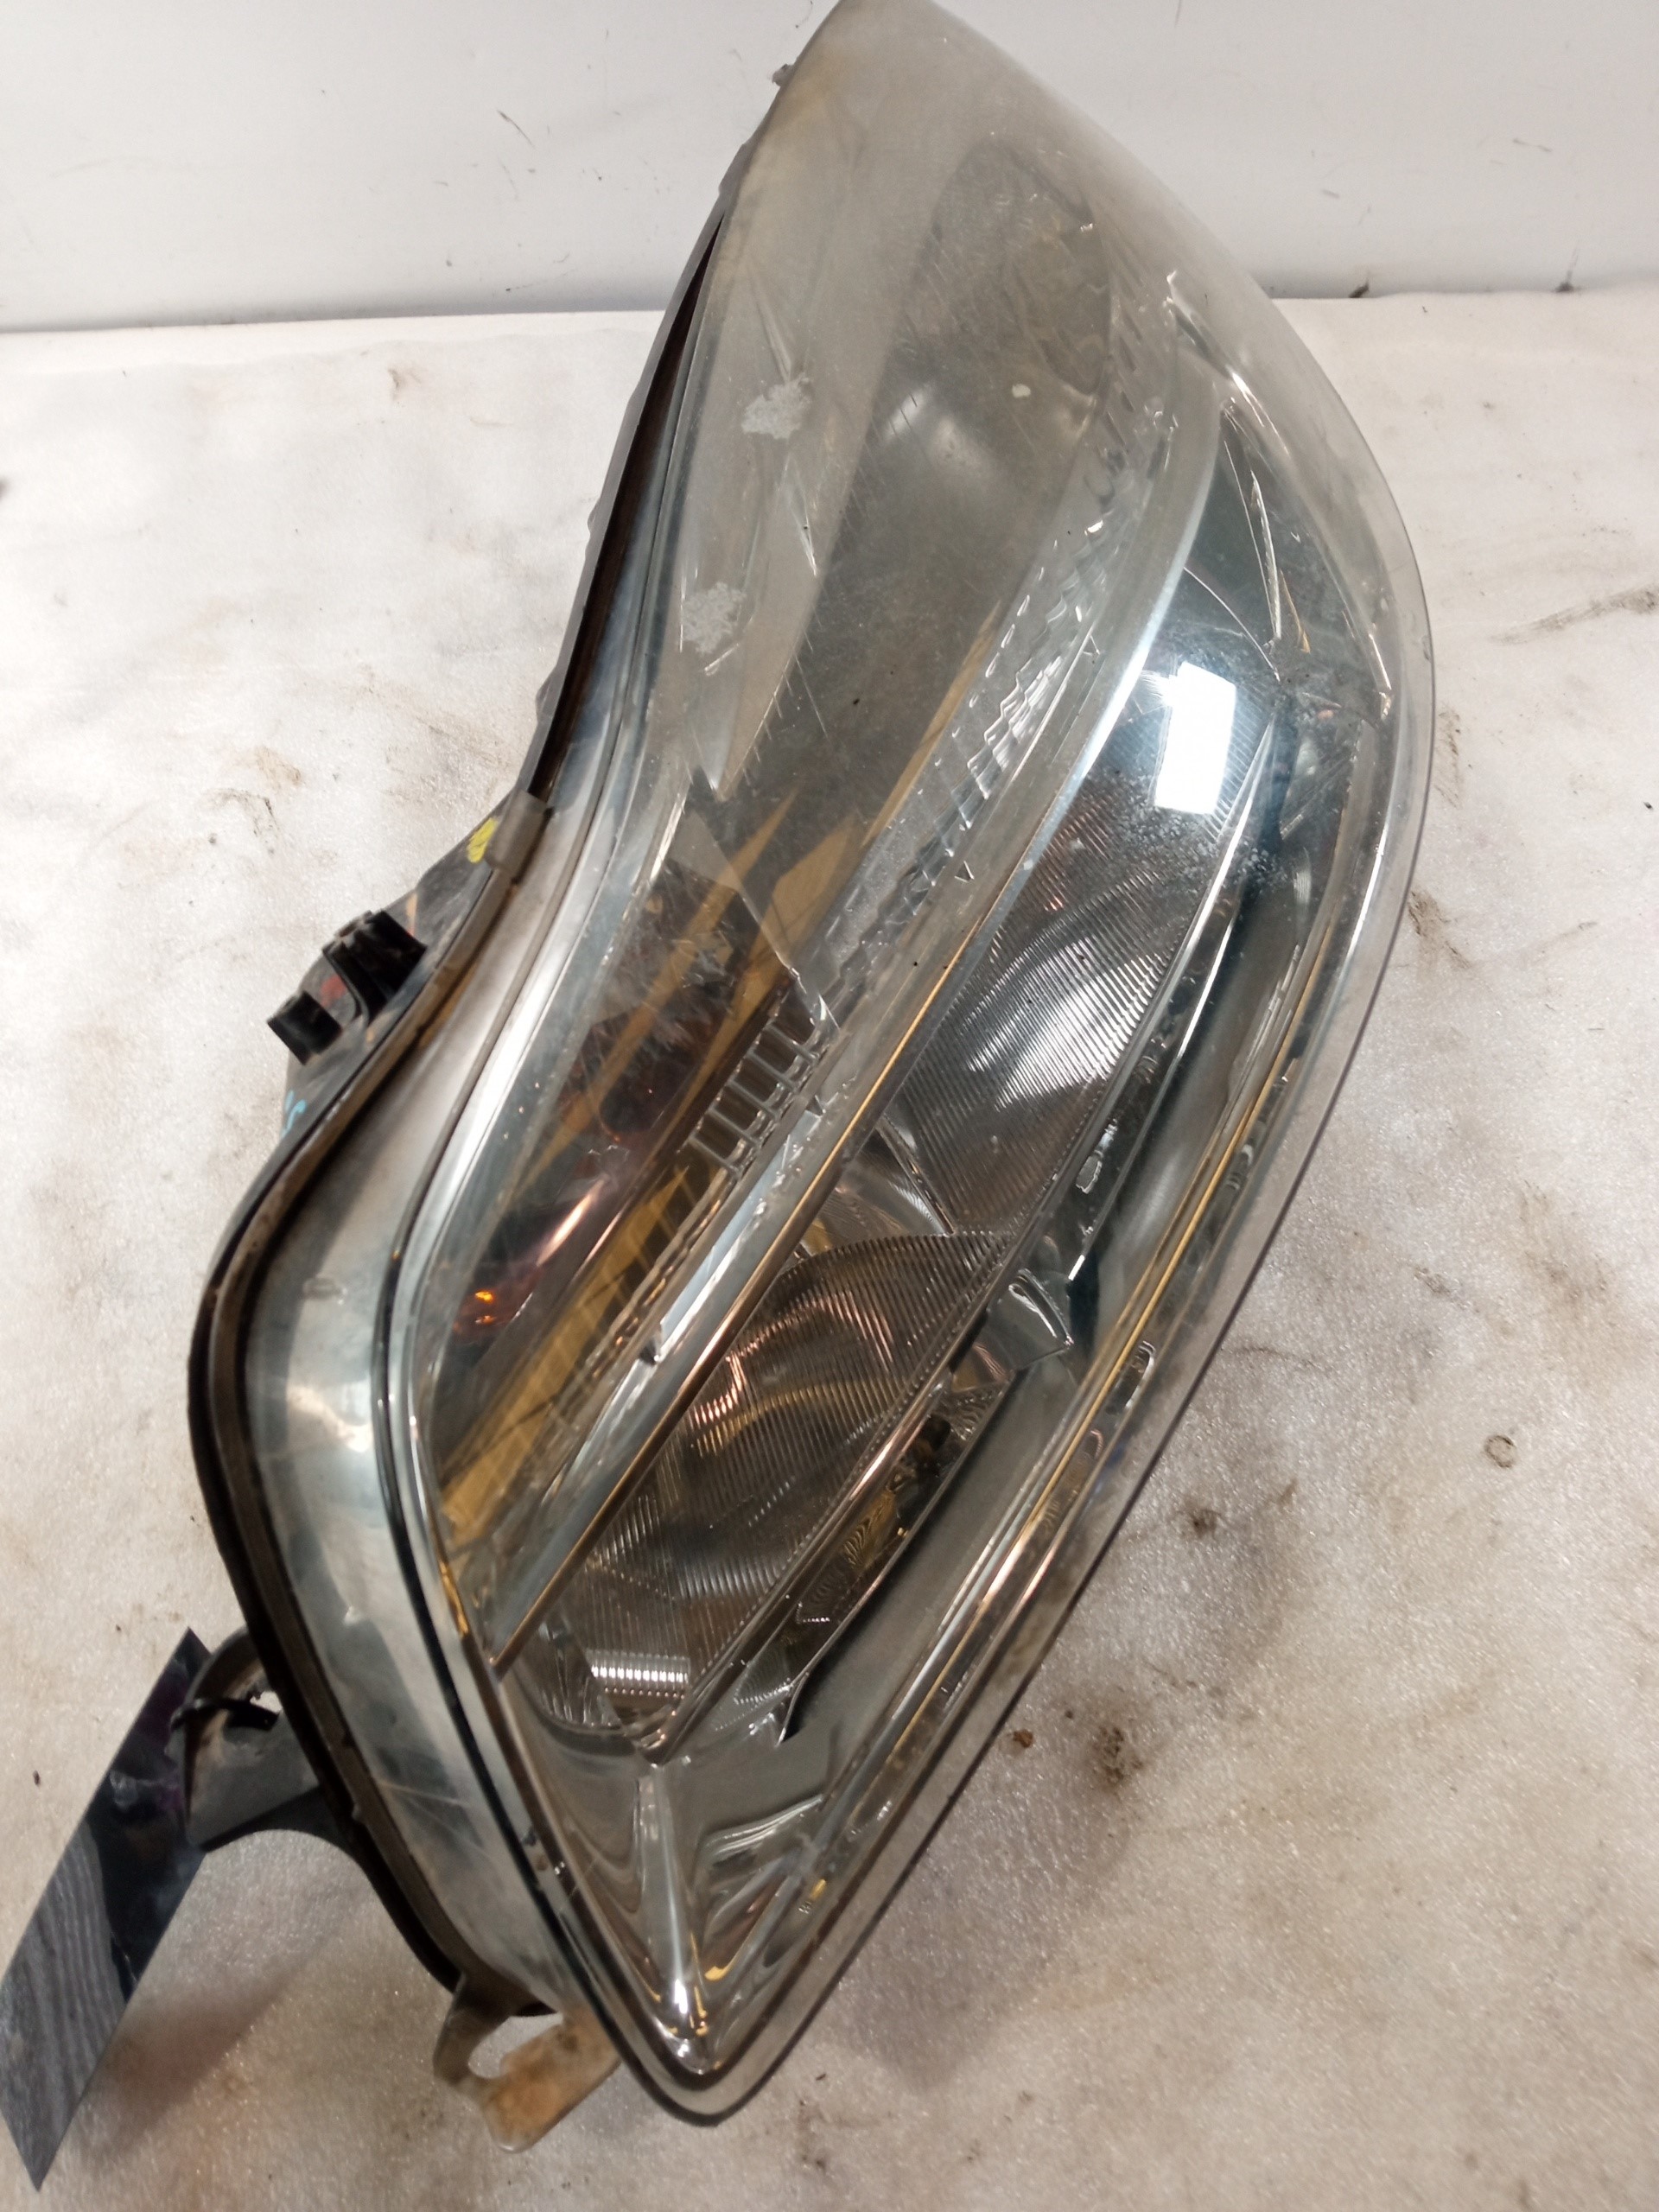 OPEL Insignia A (2008-2016) Front Left Headlight 1EJ00963001, 9PINES 25220259